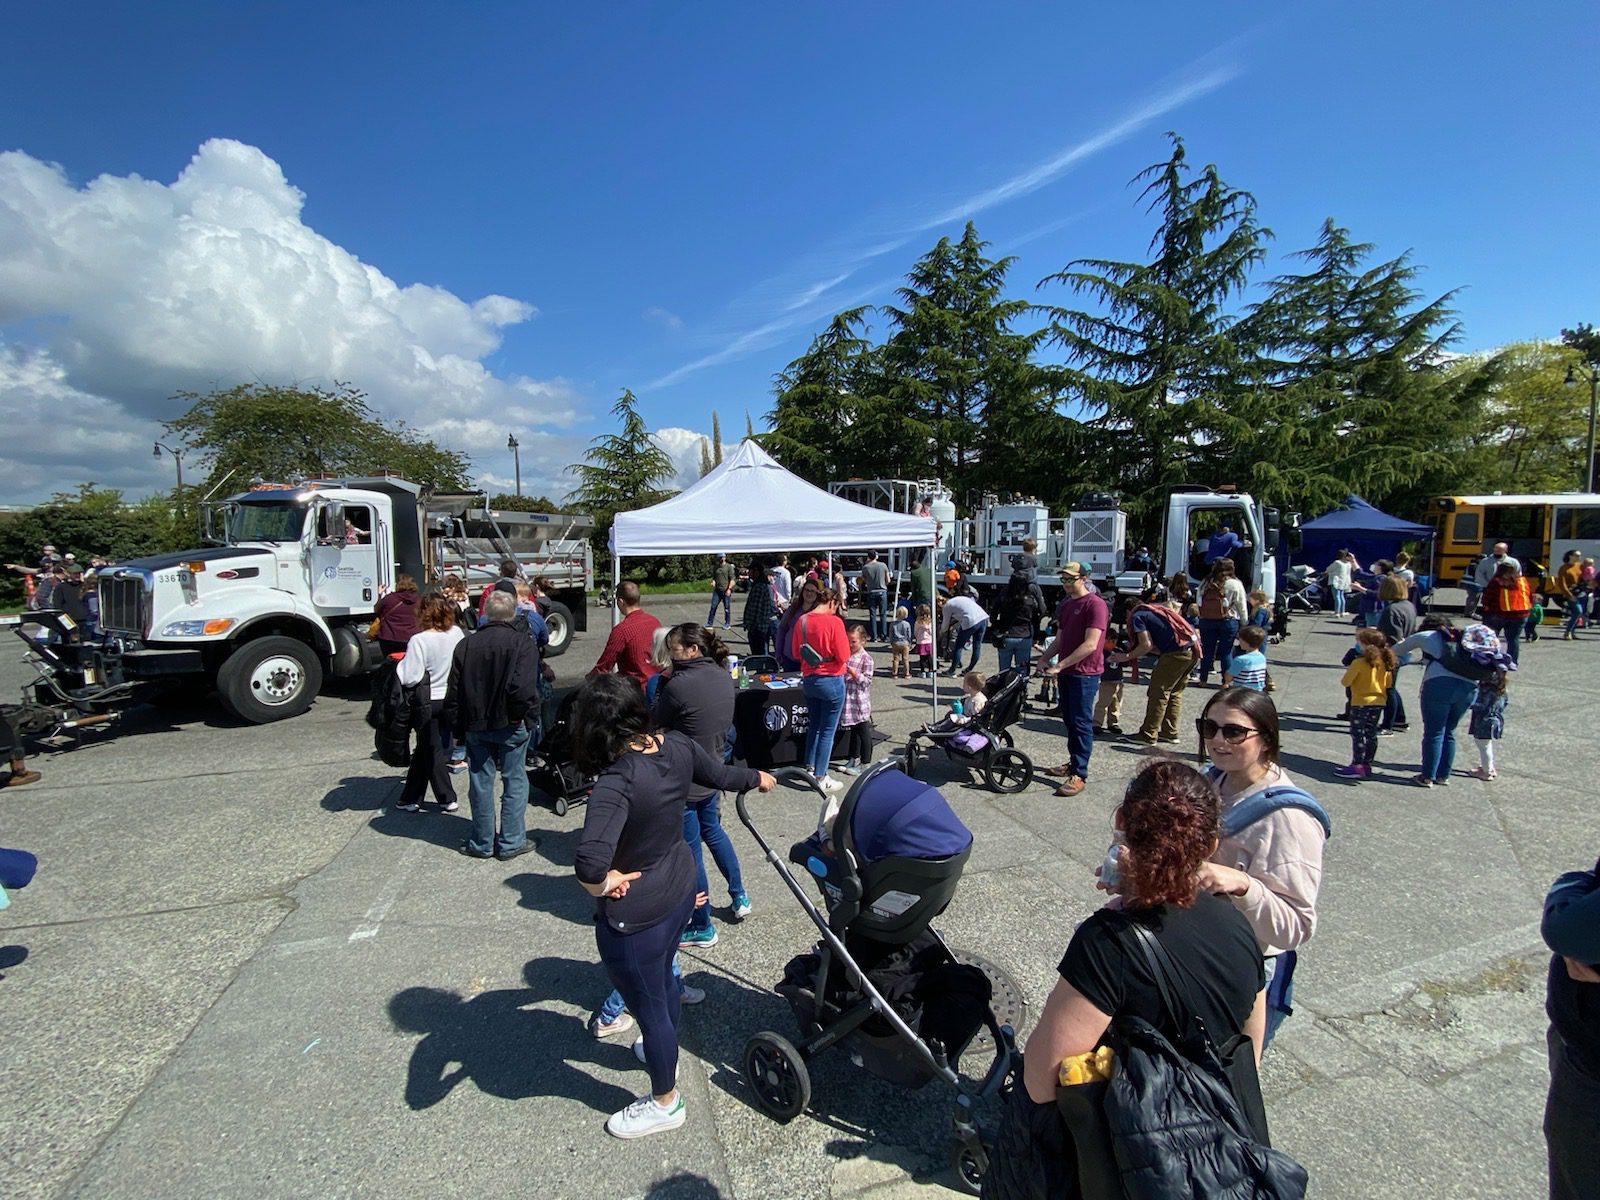 Event participants wait to check out SDOT's two vehicles and speak with our team at the Touch-A-Truck event.